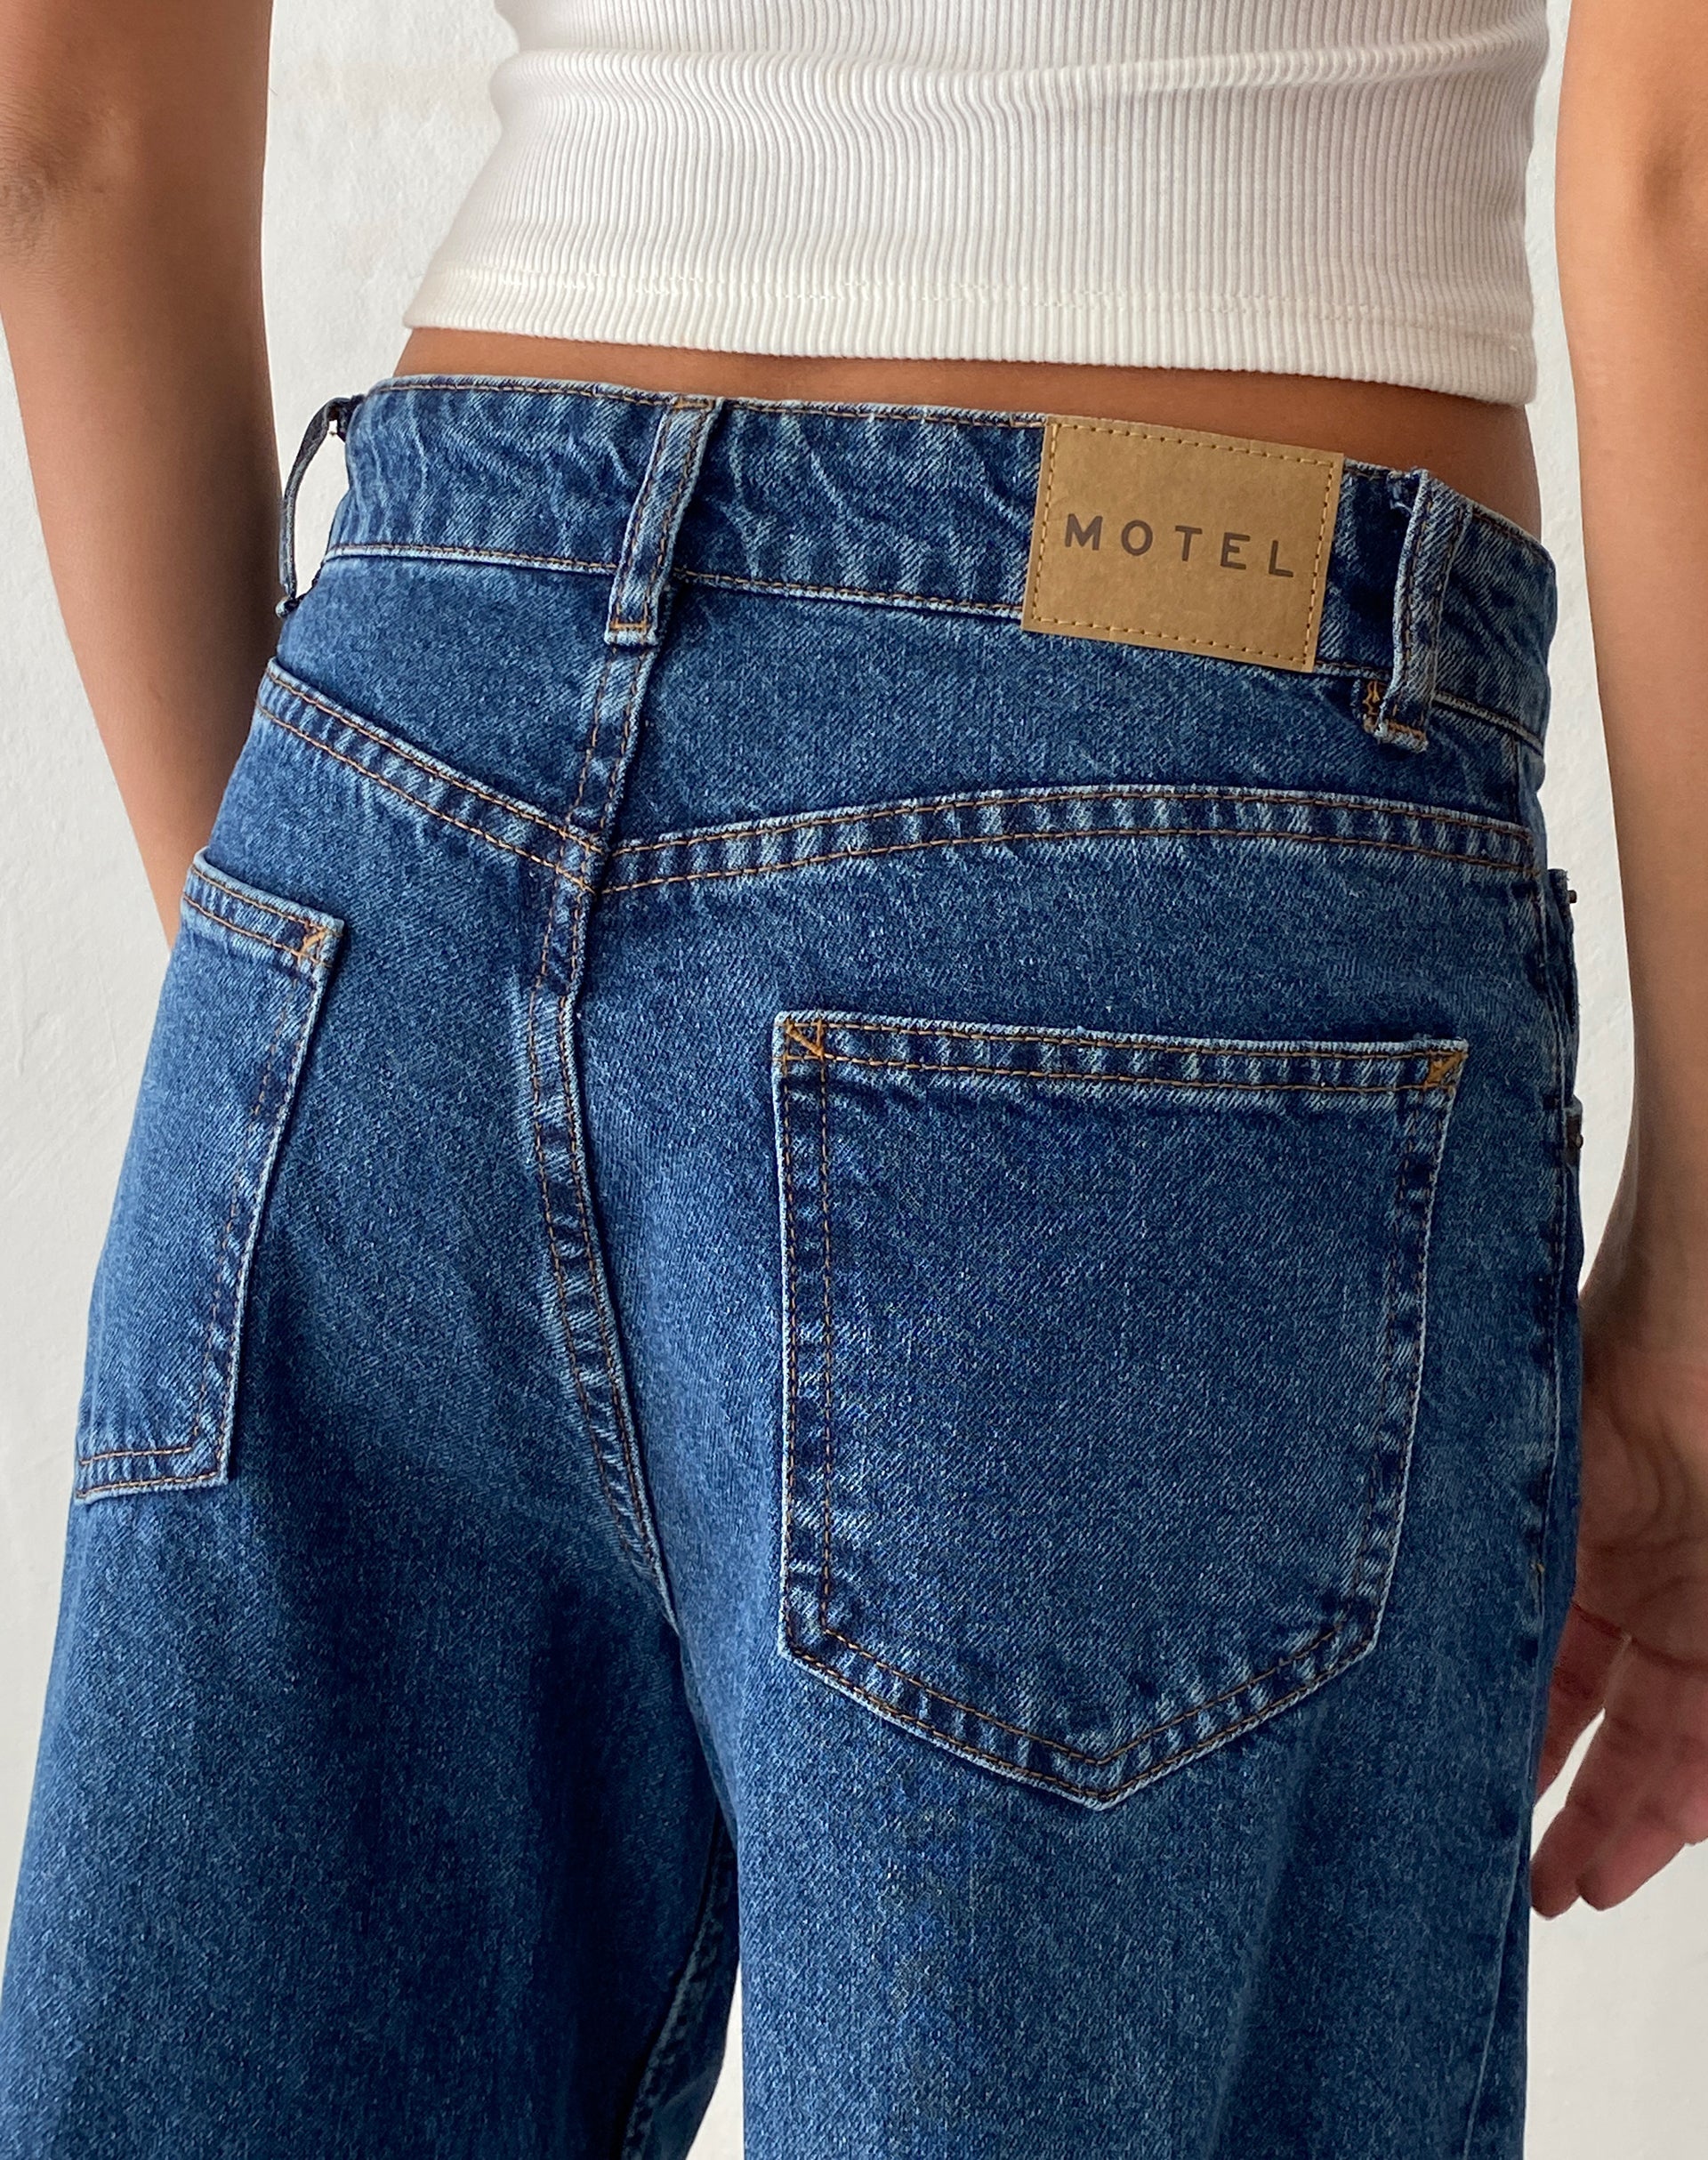 https://au.motelrocks.com/cdn/shop/files/AUS-TOP-RIB-WHITE-_-CUT-OUT-ROOMY-EXTRA-WIDE-JEANS-IN-MID-BLUE-USED-LONGER-LENGHT-0055.jpg?crop=center&height=2428&v=1689325353&width=1920